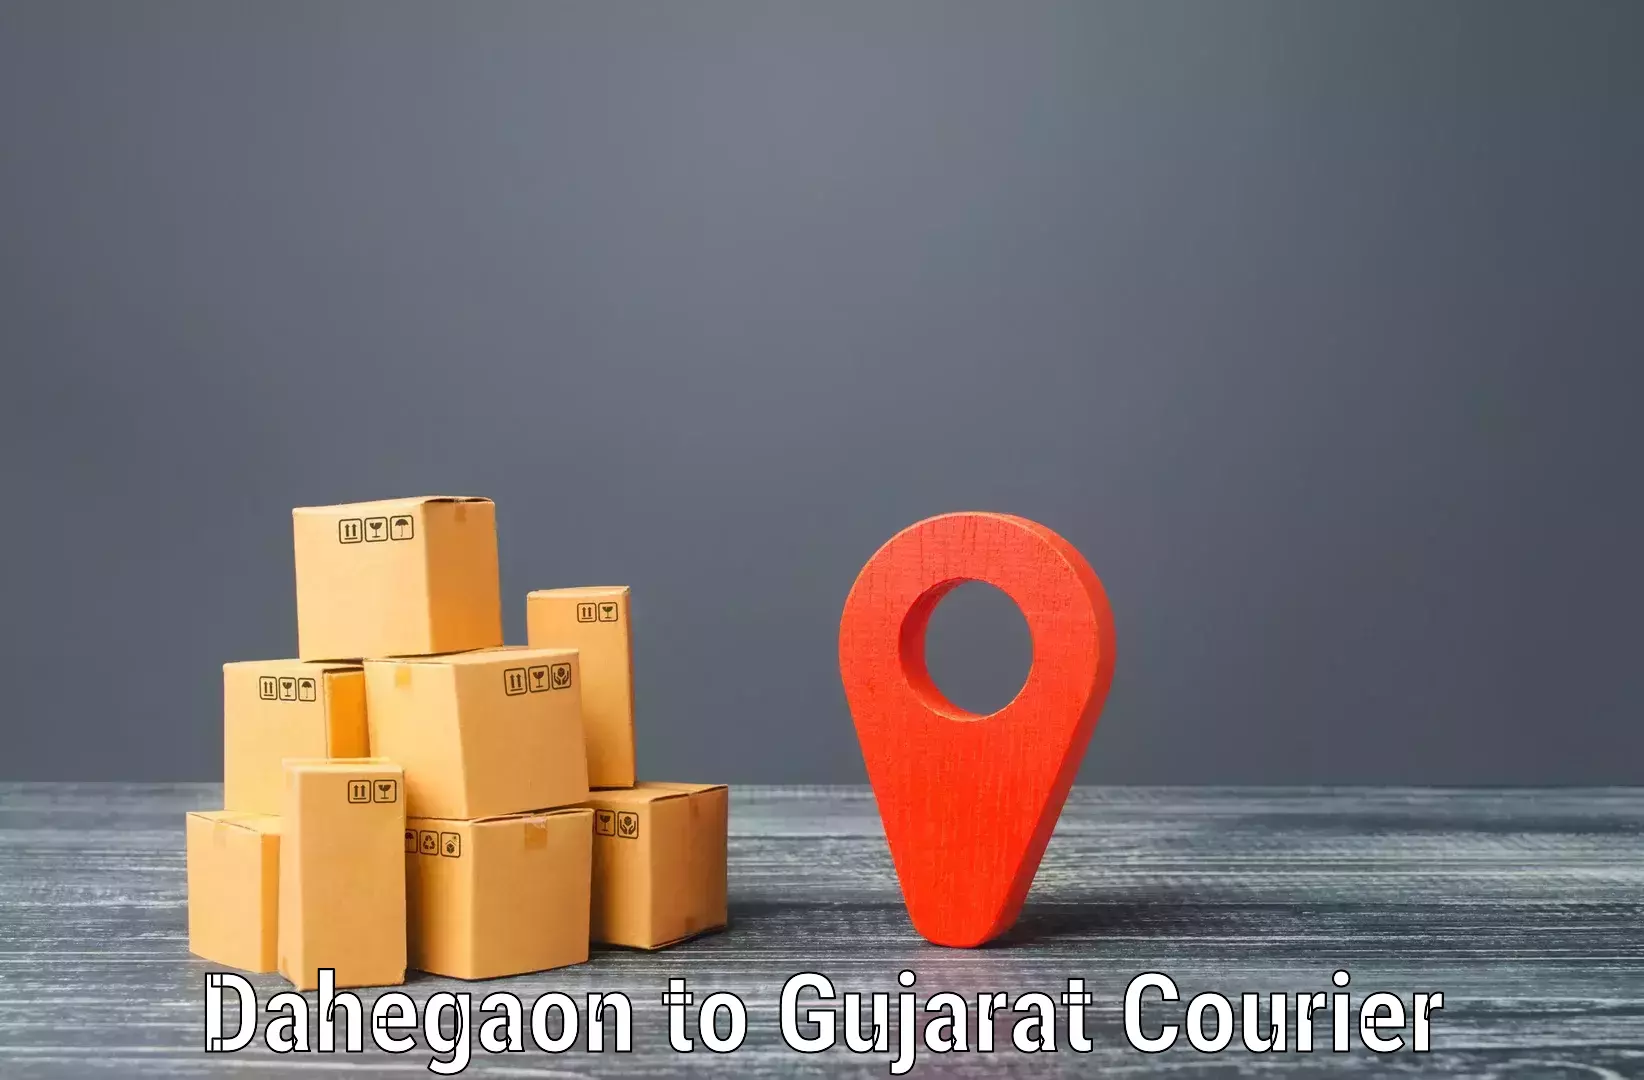 Package delivery network Dahegaon to Ahmedabad